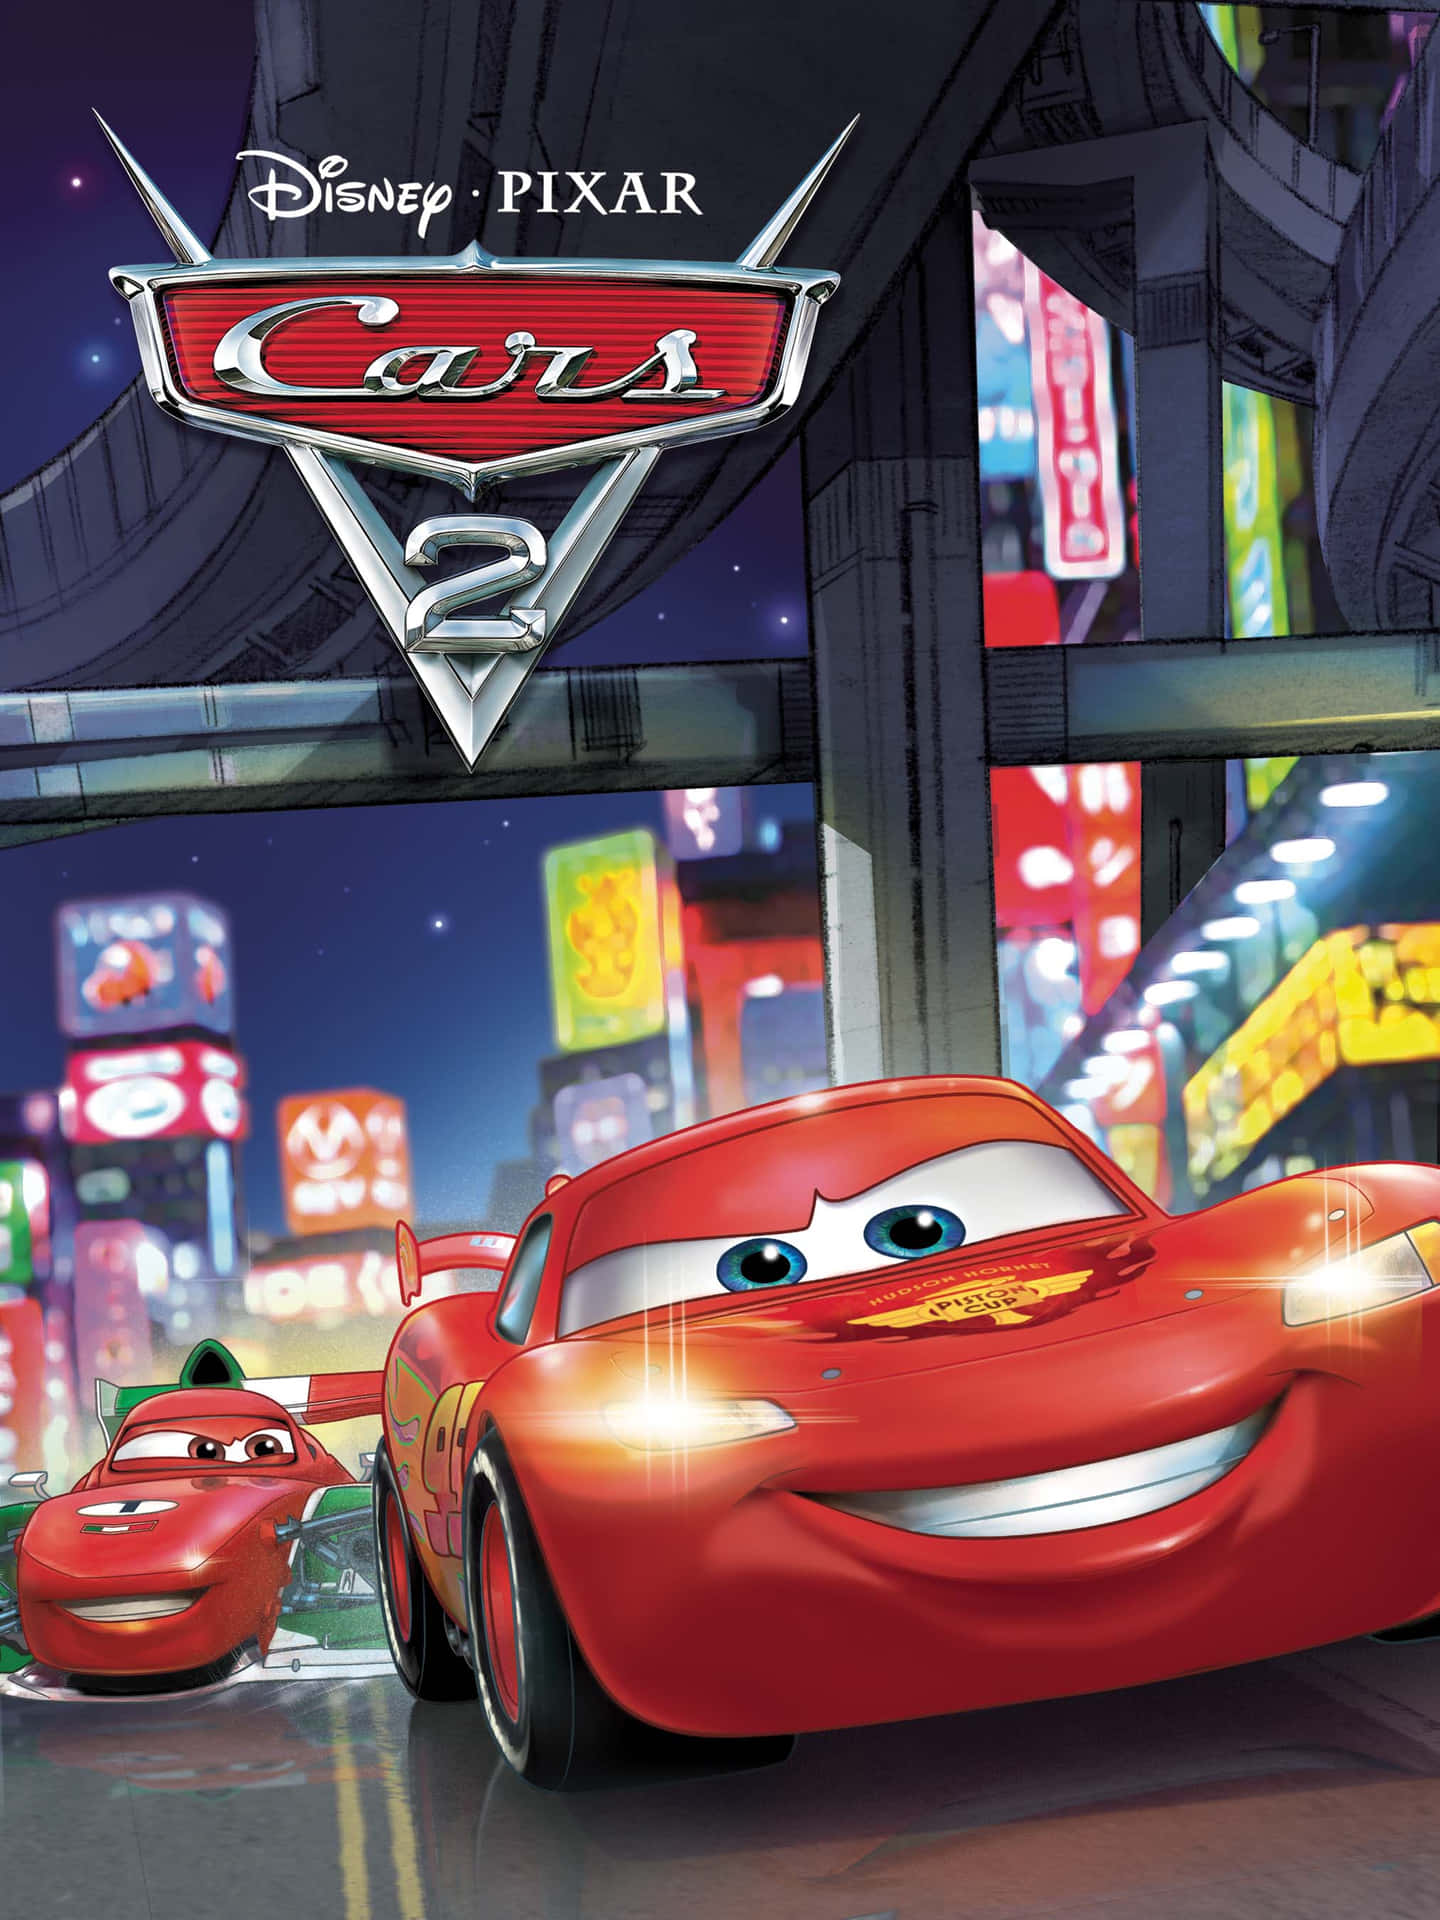 Lightning McQueen takes the lead in Cars 2